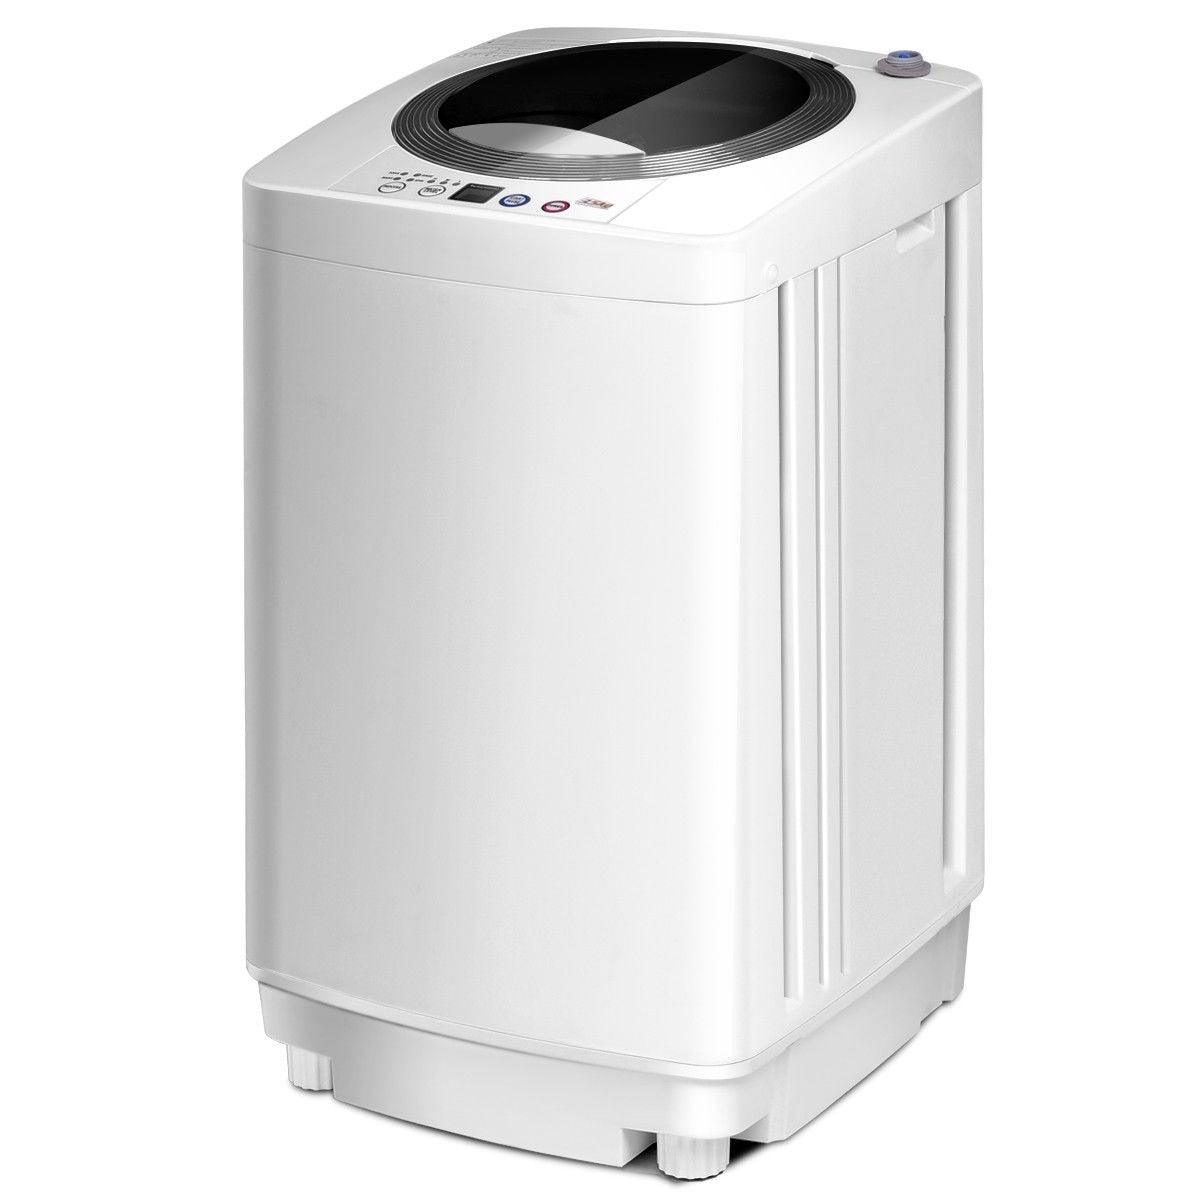 GIANTEX Portable 6 lbs Automatic Laundry Washing Machine EP22761, with Drain Pump for Home Apartment - YOURISHOP.COM